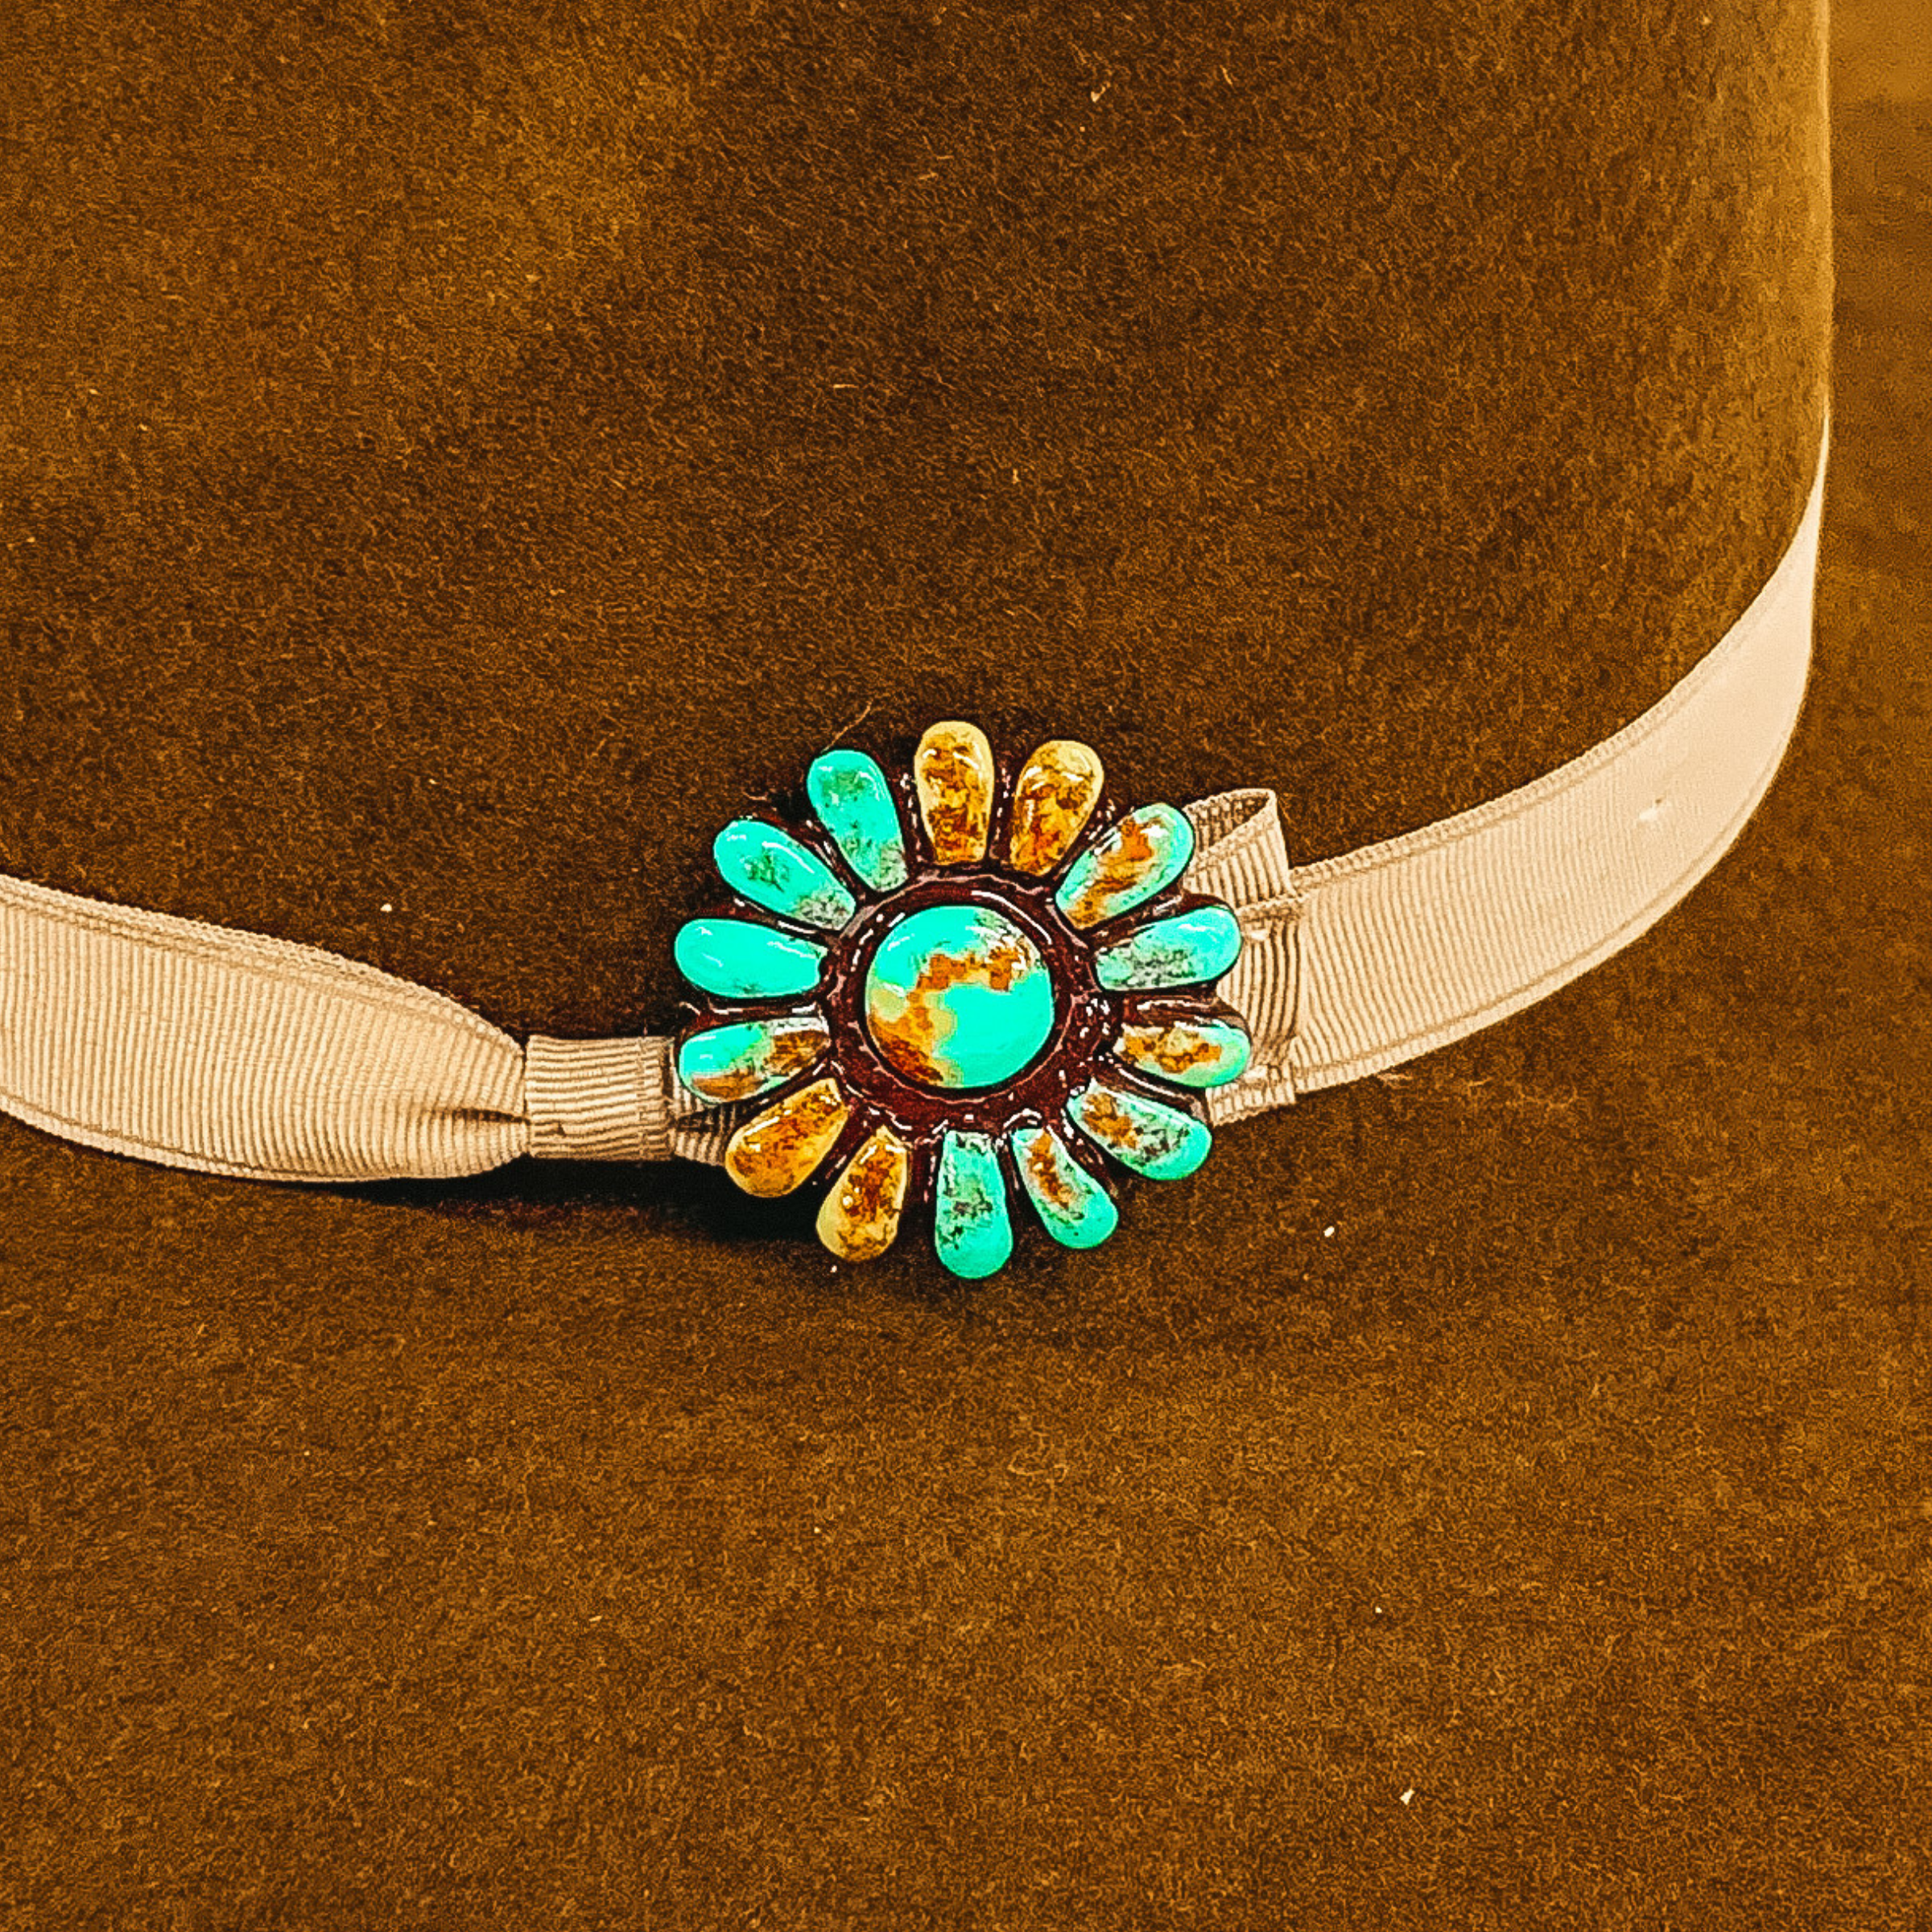 This hat pin is a flower concho. The main color is turquoise and is mixed with brown, red and yellow like real turquoise. This hat pin is pictured in front of a beige hat band.